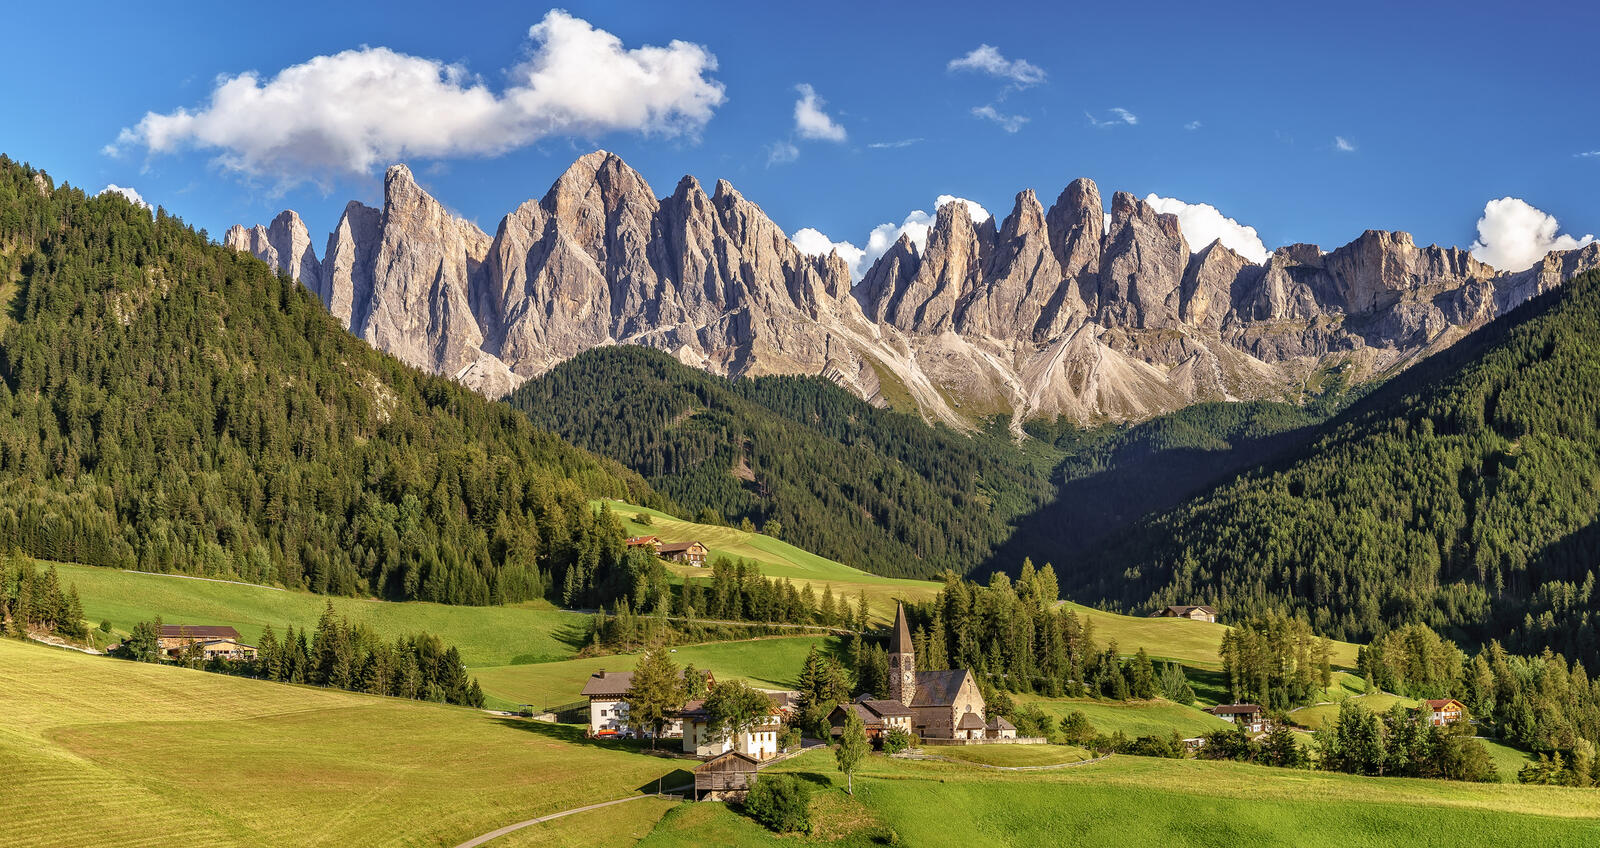 Wallpapers Dolomite Alps South Tyrol Italy on the desktop